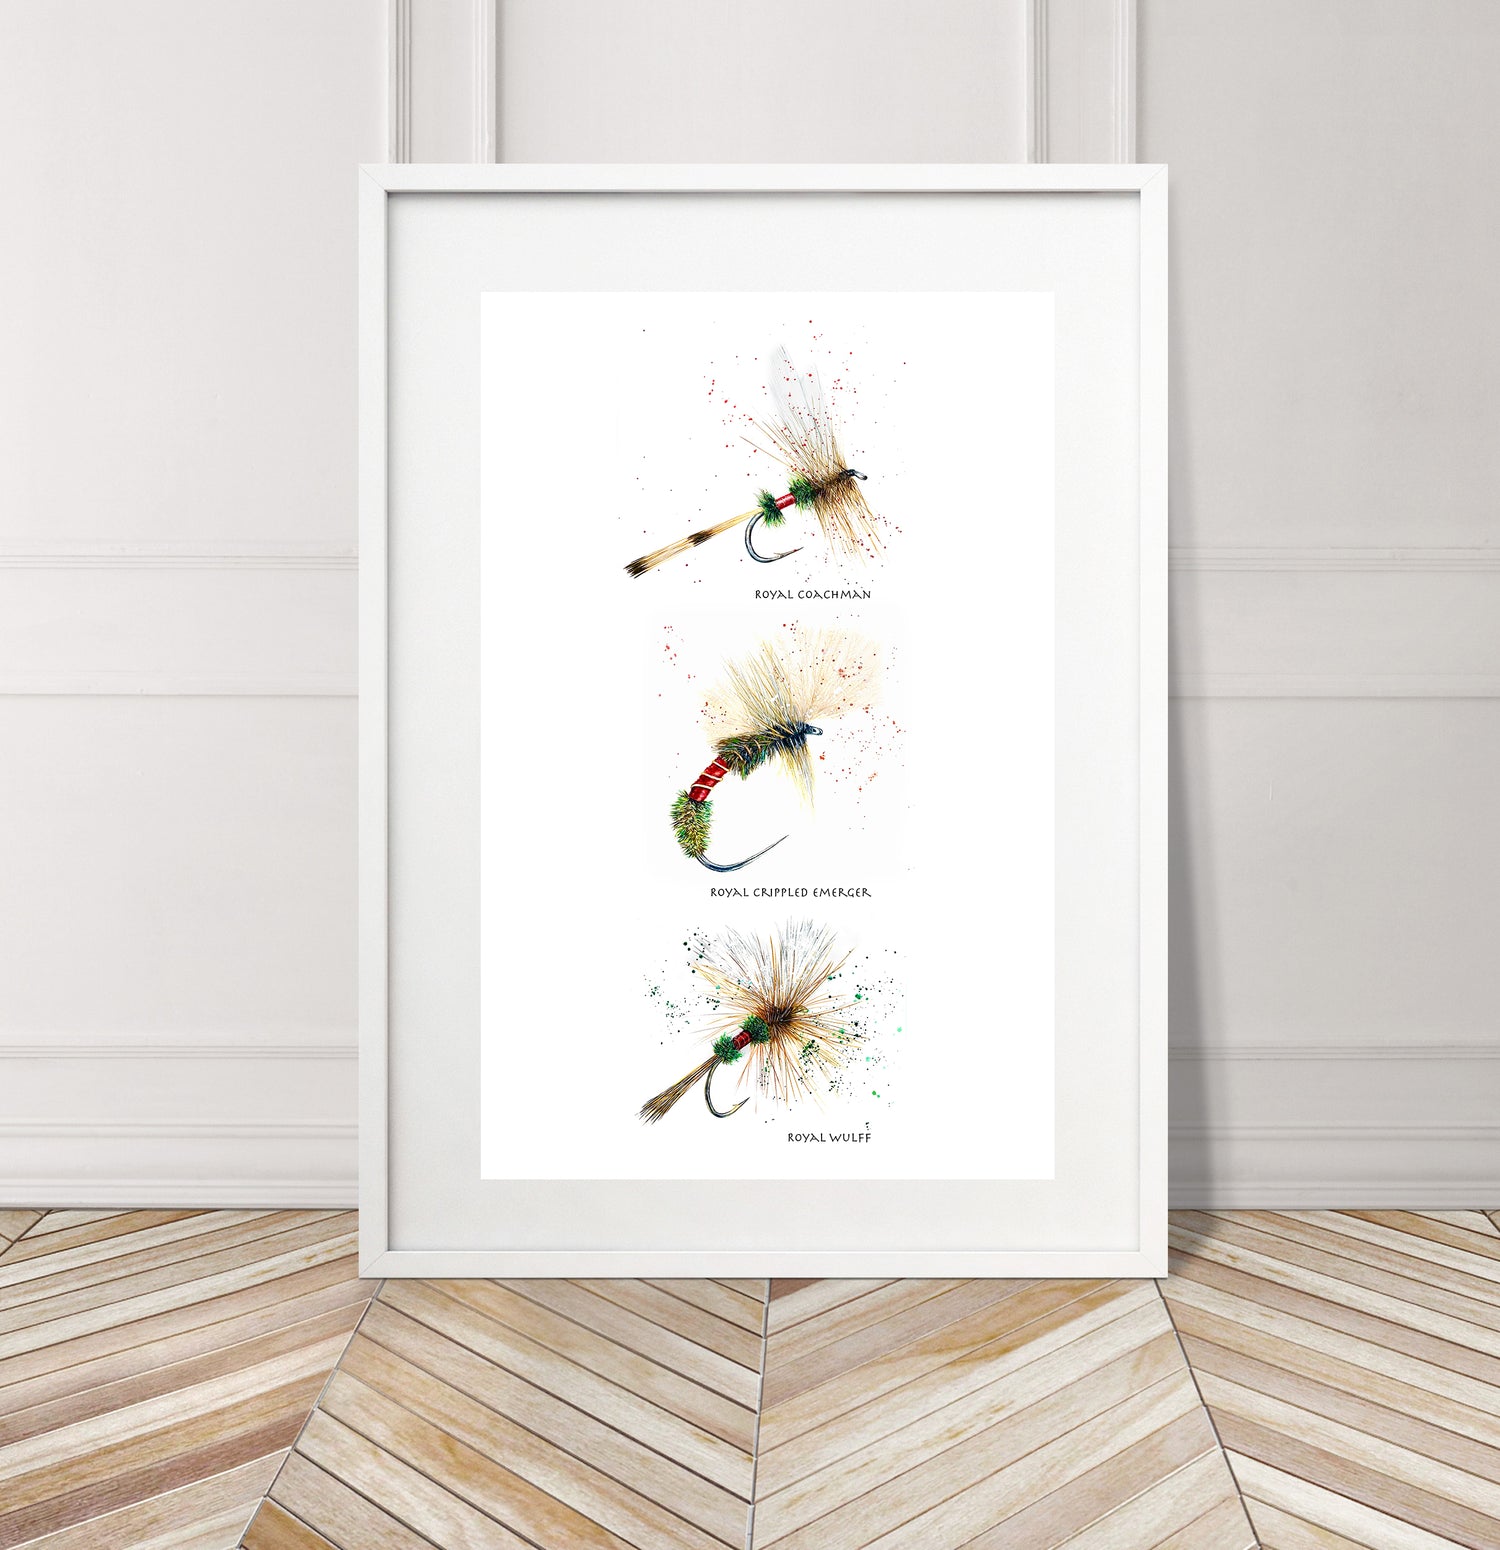 Limited Edition Fine Art Print: Art of Fly Tying, Collection 3 - Royals: Royal Cochman, Royal Crippled Emerger, Royal Wulff